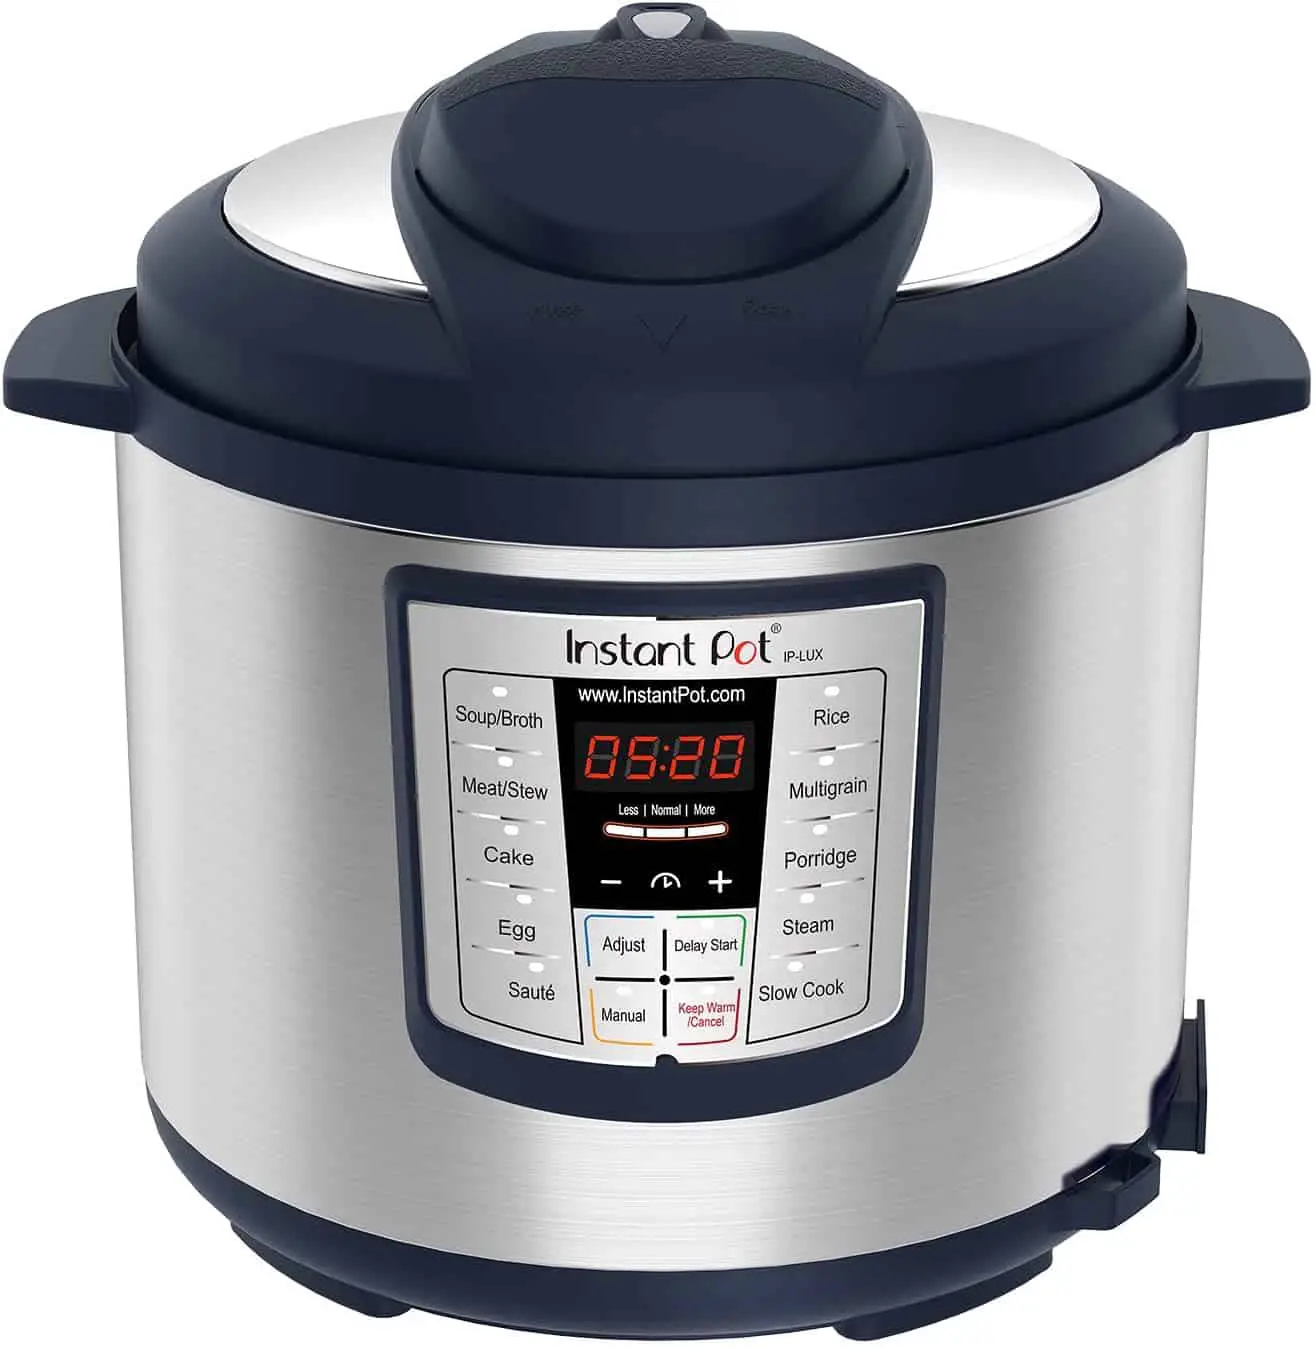 The Best Instant Pot Slow Cooker Reviews in 2021